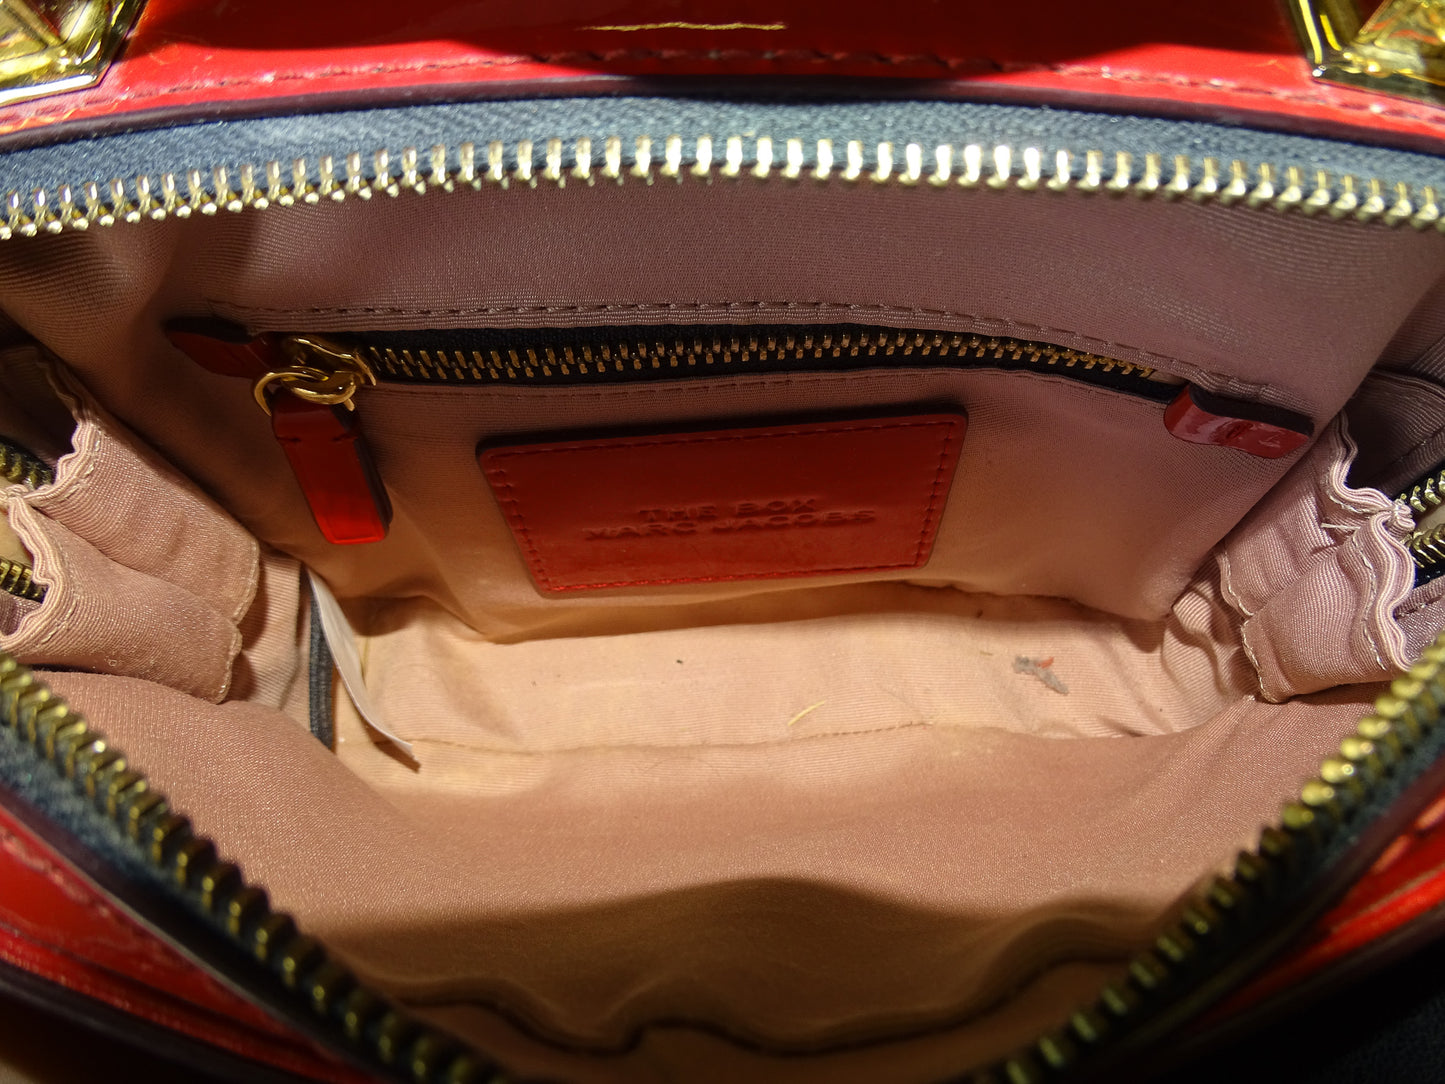 Marc Jacobs Red Patent The Box 20 Bag with Lips Handle